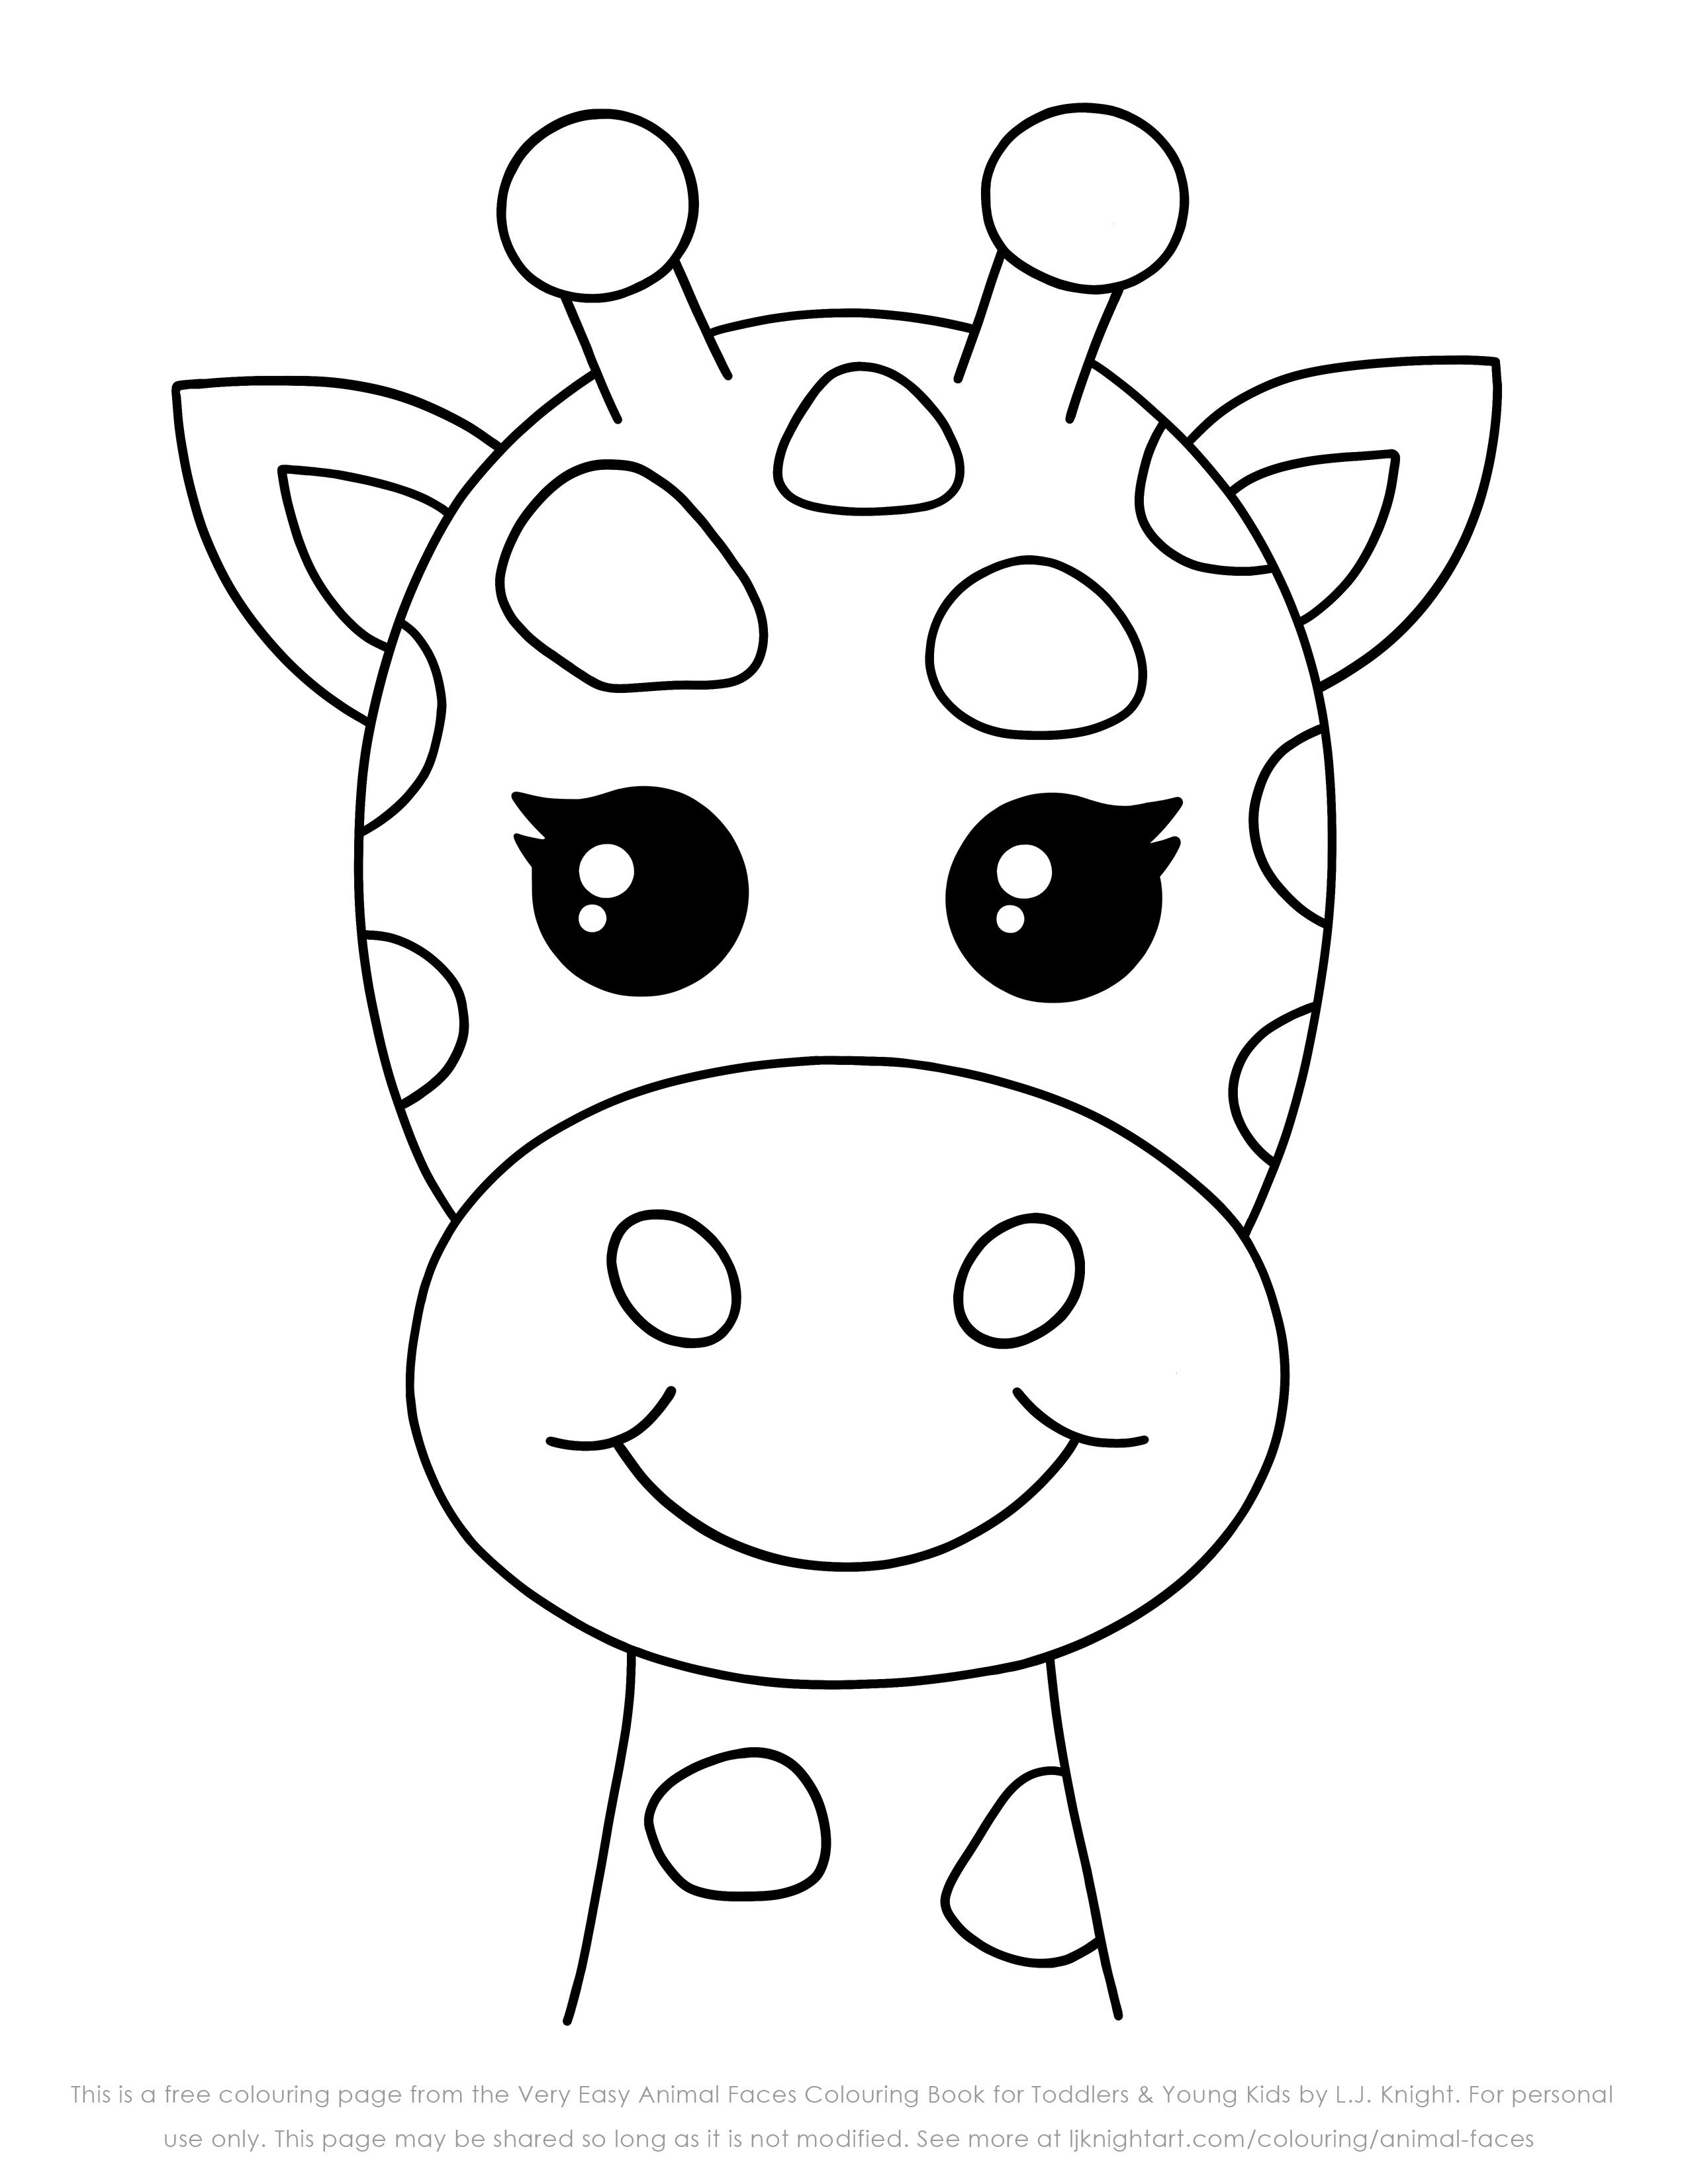 New Very Easy Animal Faces Colouring Book L.J. Knight Art